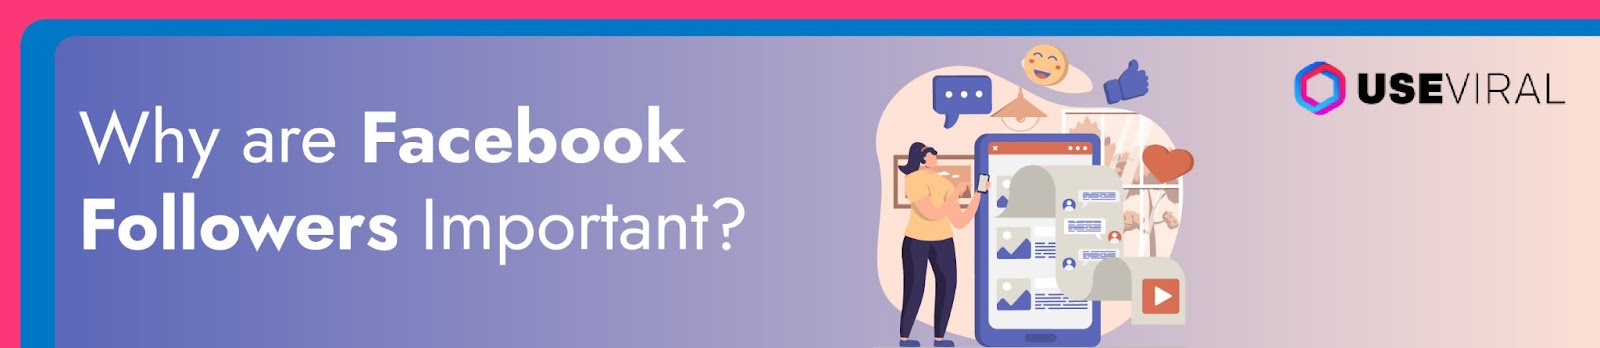 Why are Facebook Followers Important?